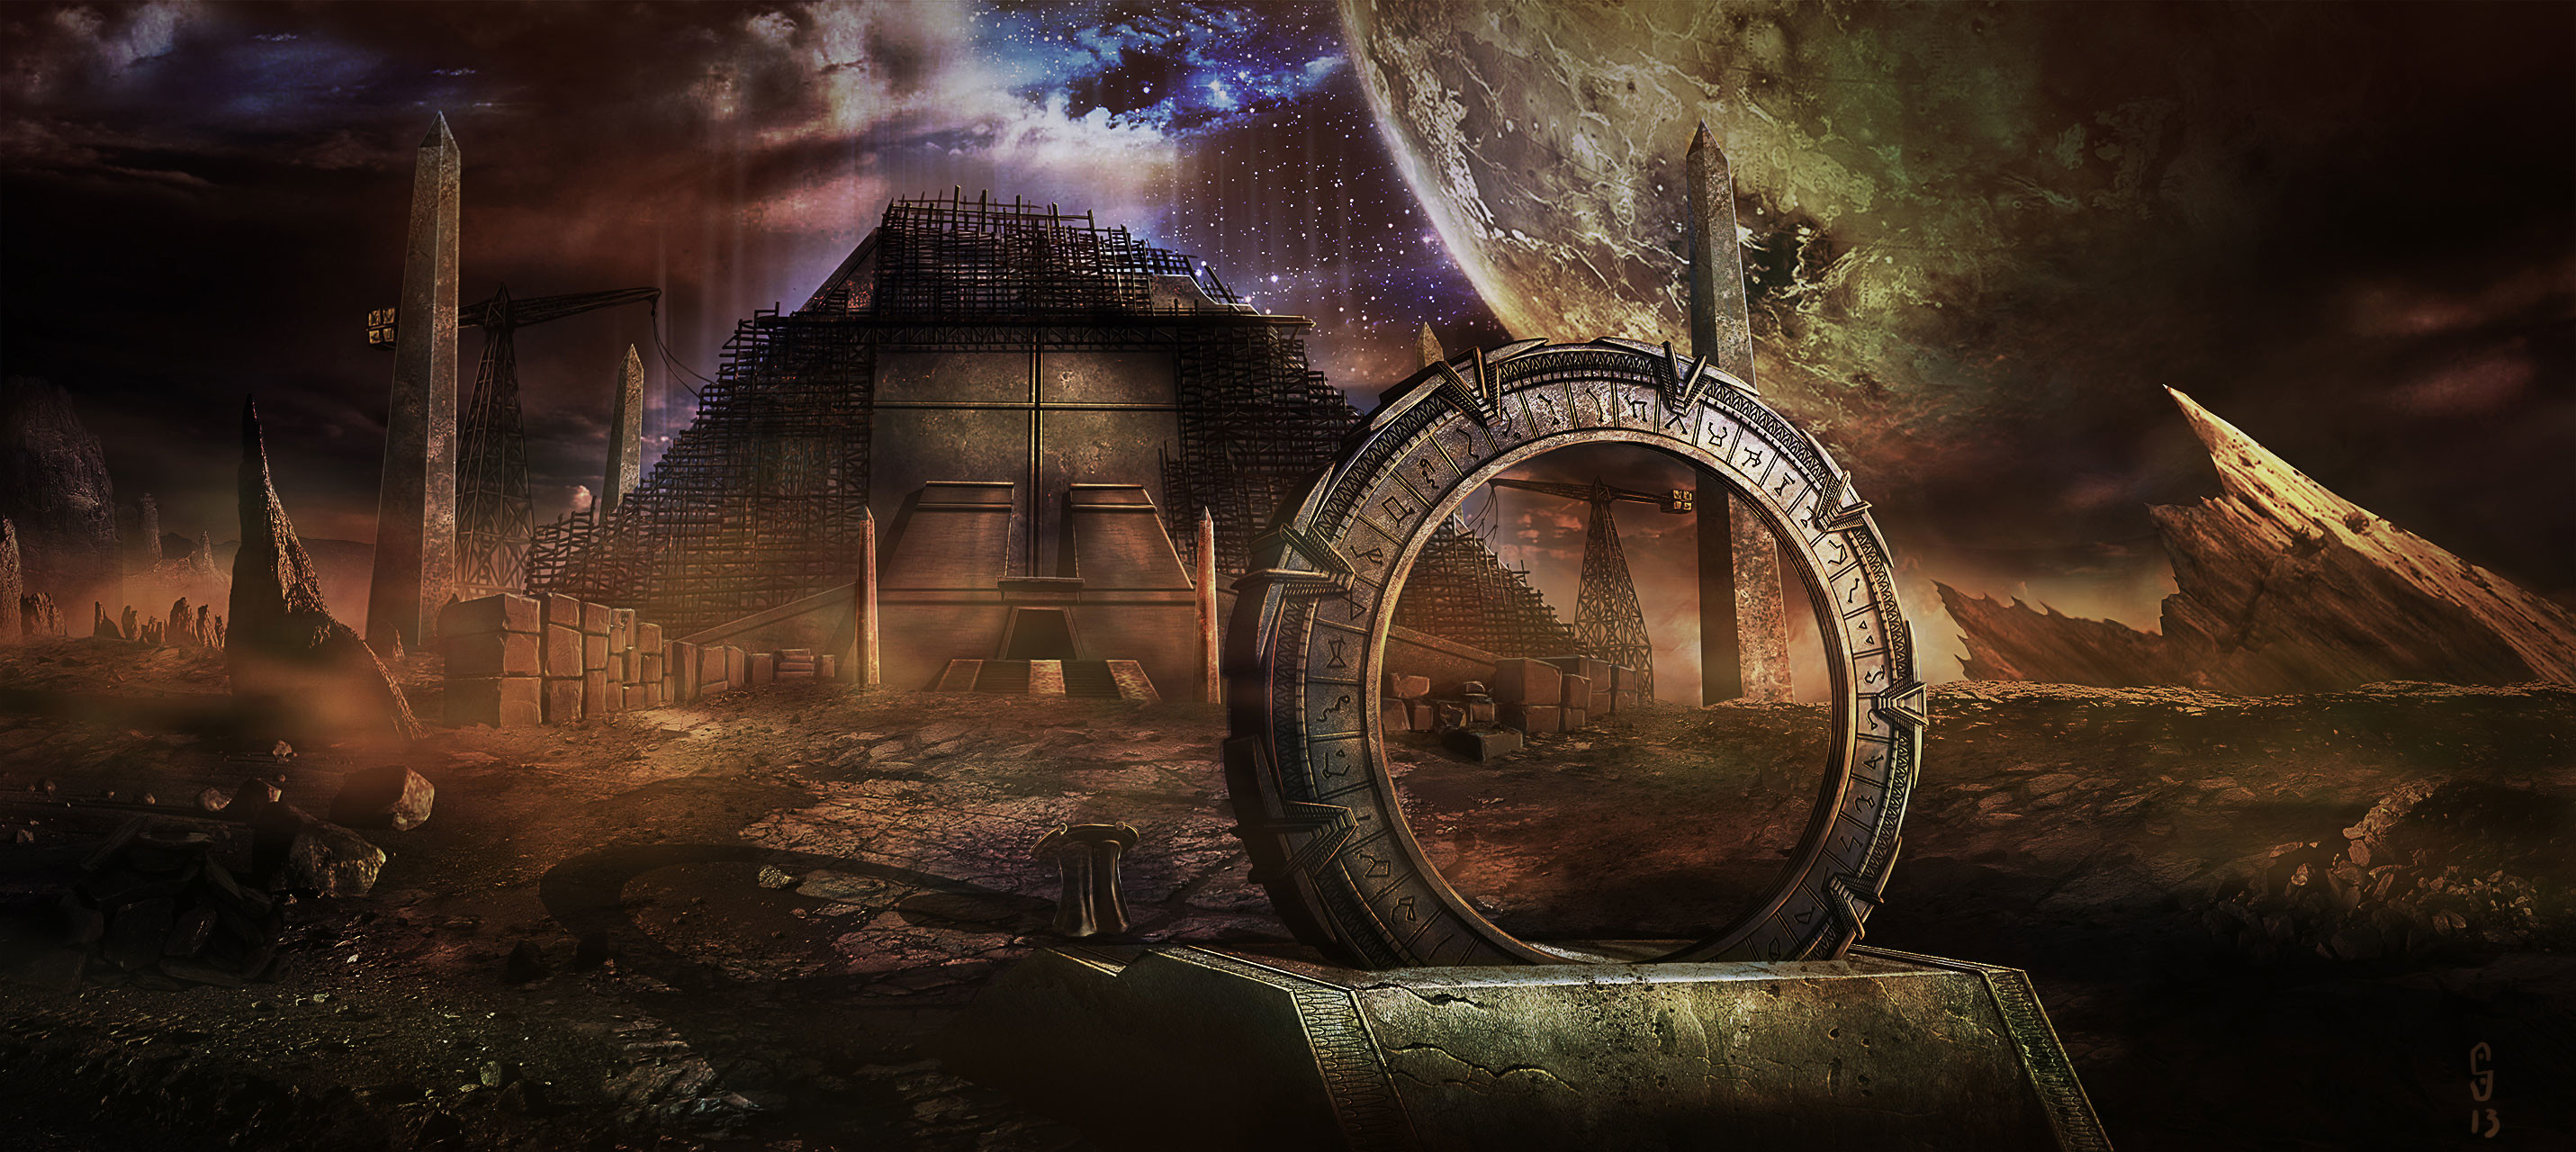 2862x1280 Stargate wallpapers